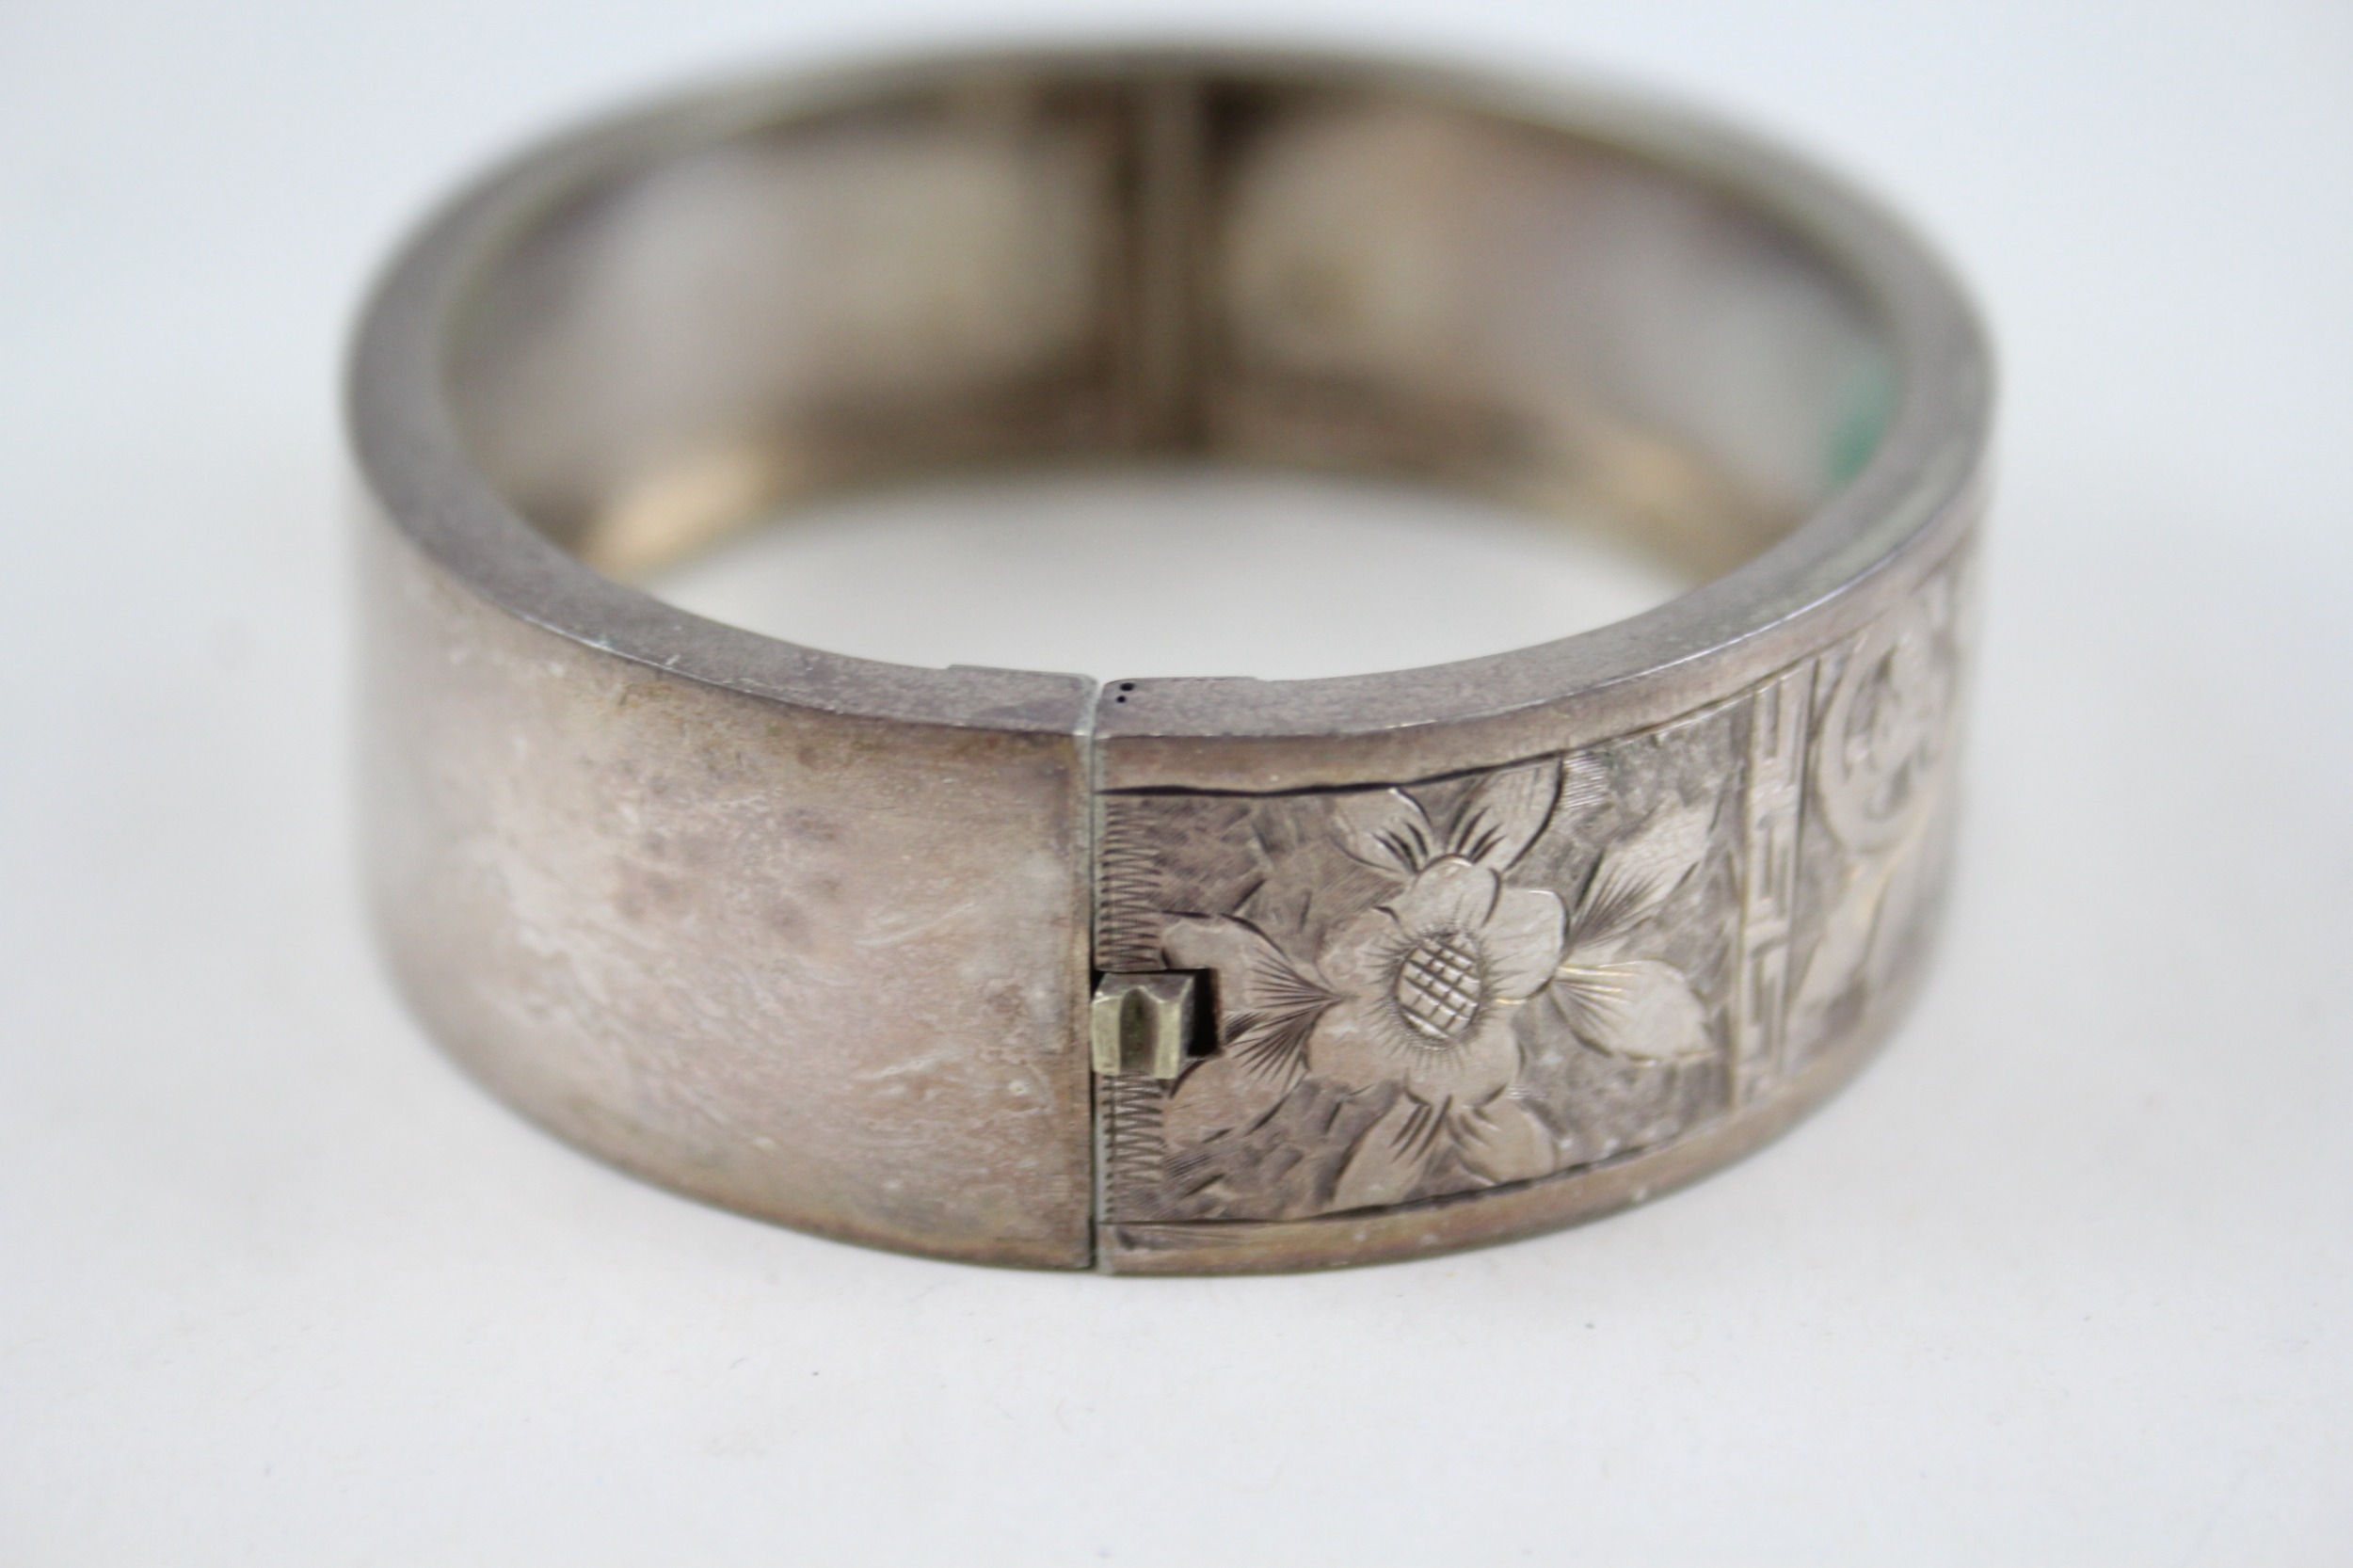 Silver antique bangle with etched design (24g) - Image 4 of 4